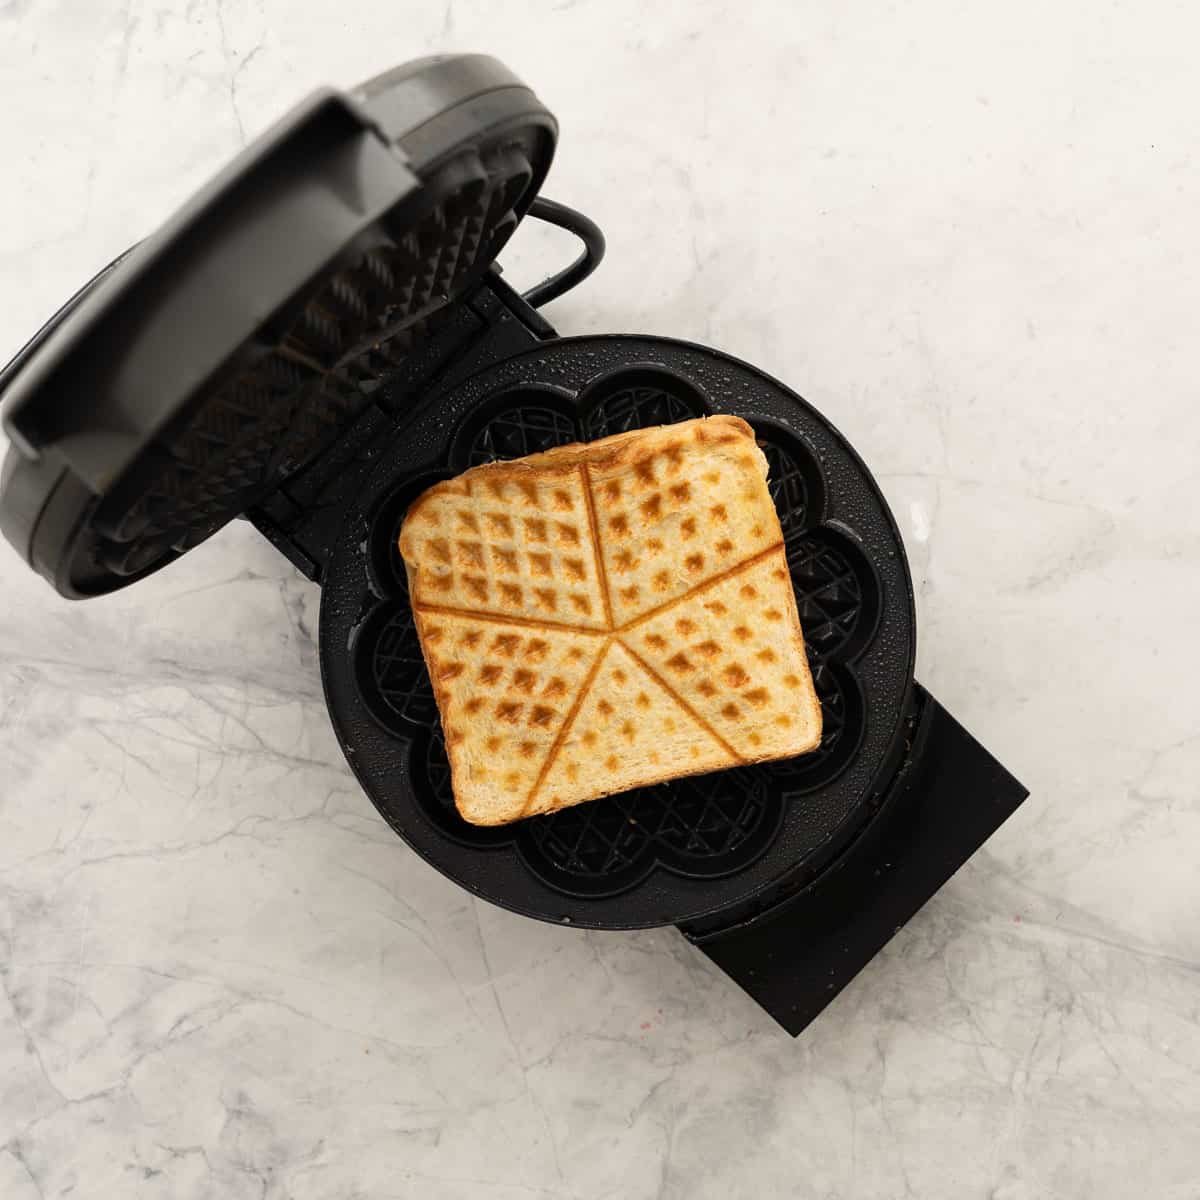 A waffle maker resting on the bench with one toasted peanut butter and banana sandwich